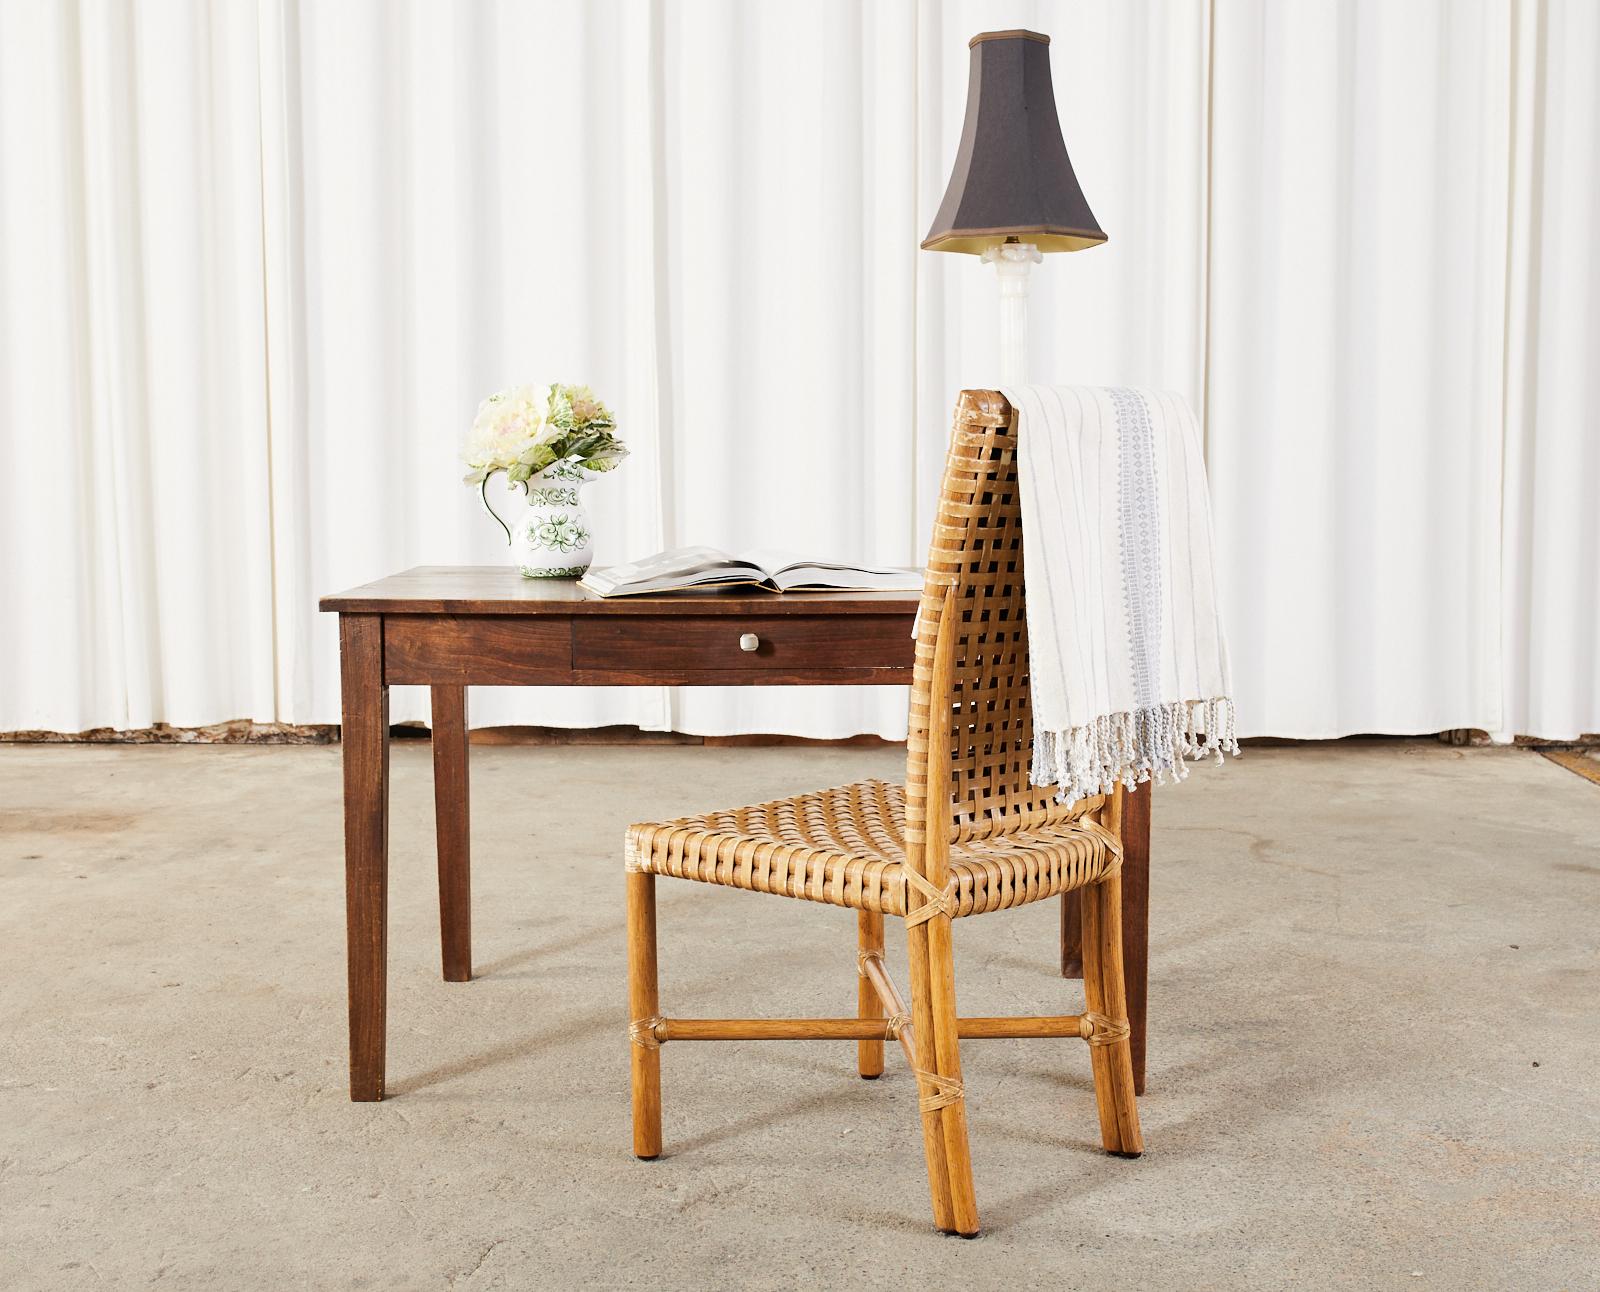 Weathered set of eight McGuire rawhide dining chairs. Model #MCLM71 featuring geometric lattice leather laces. Made in the California organic modern style by McGuire. Crafted from thick rattan poles lashed together on the exposed joints with rawhide